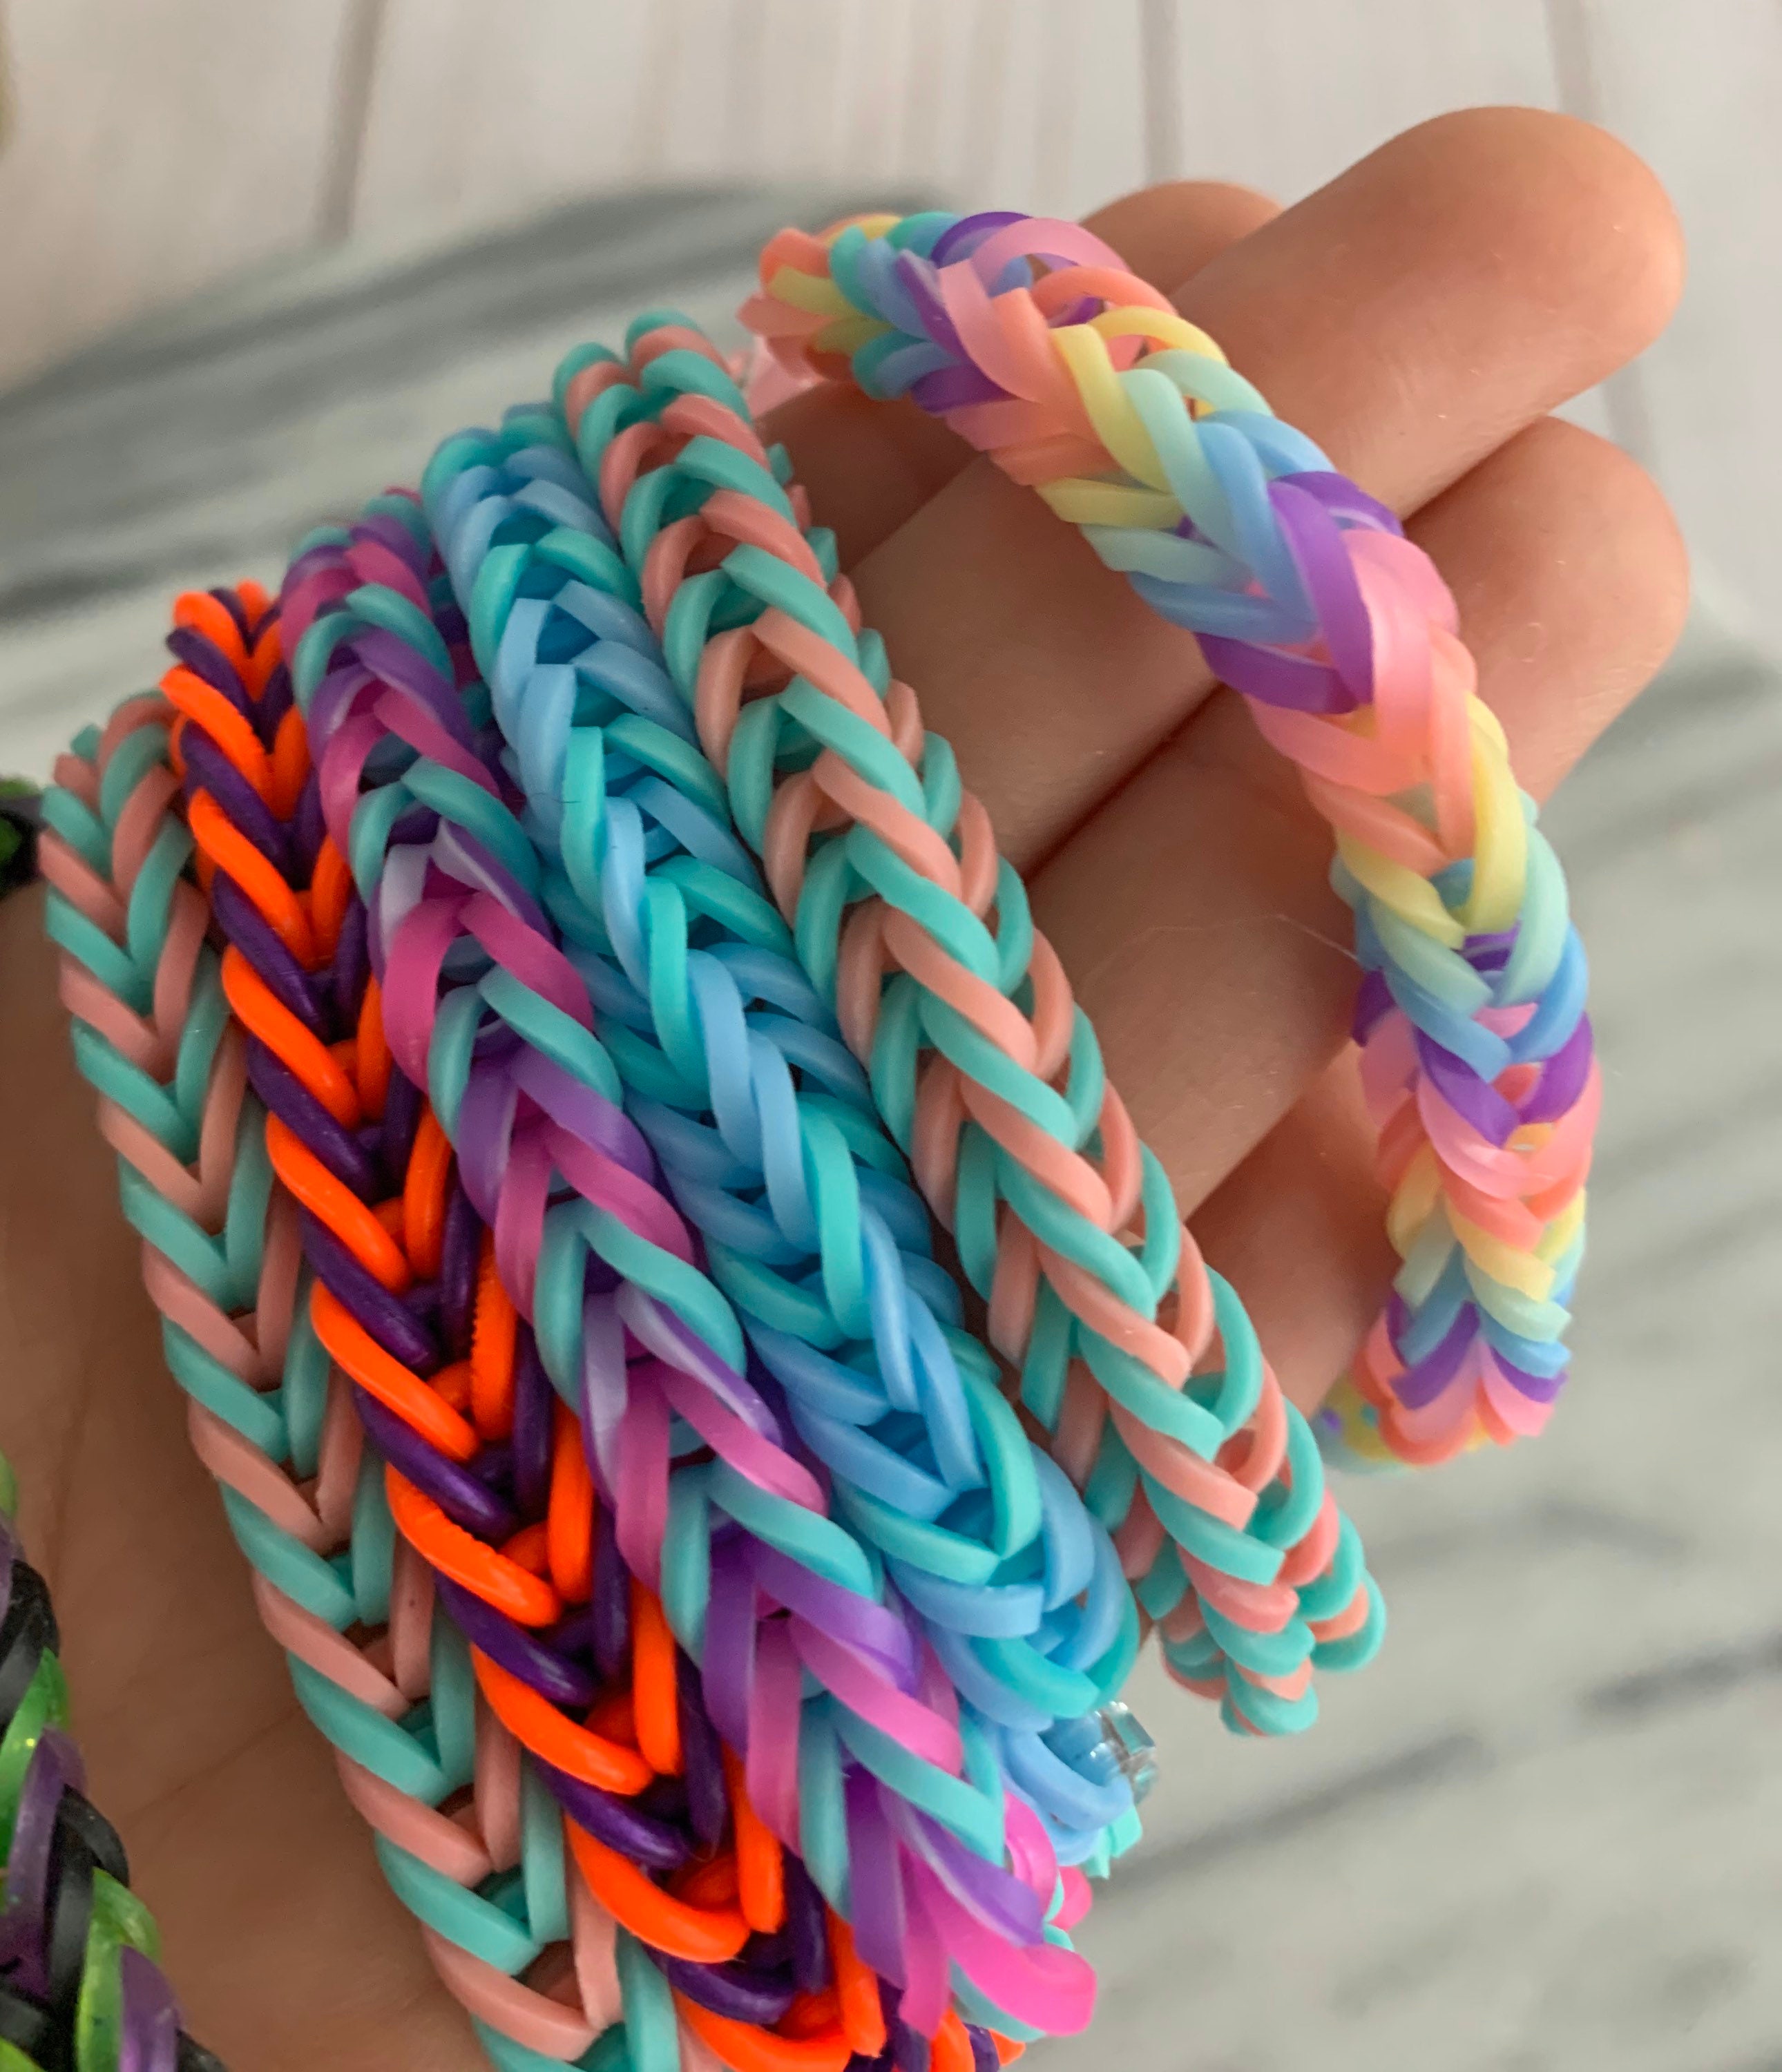 Rainbow Looms Are Making A Comeback And It Makes Me So Happy